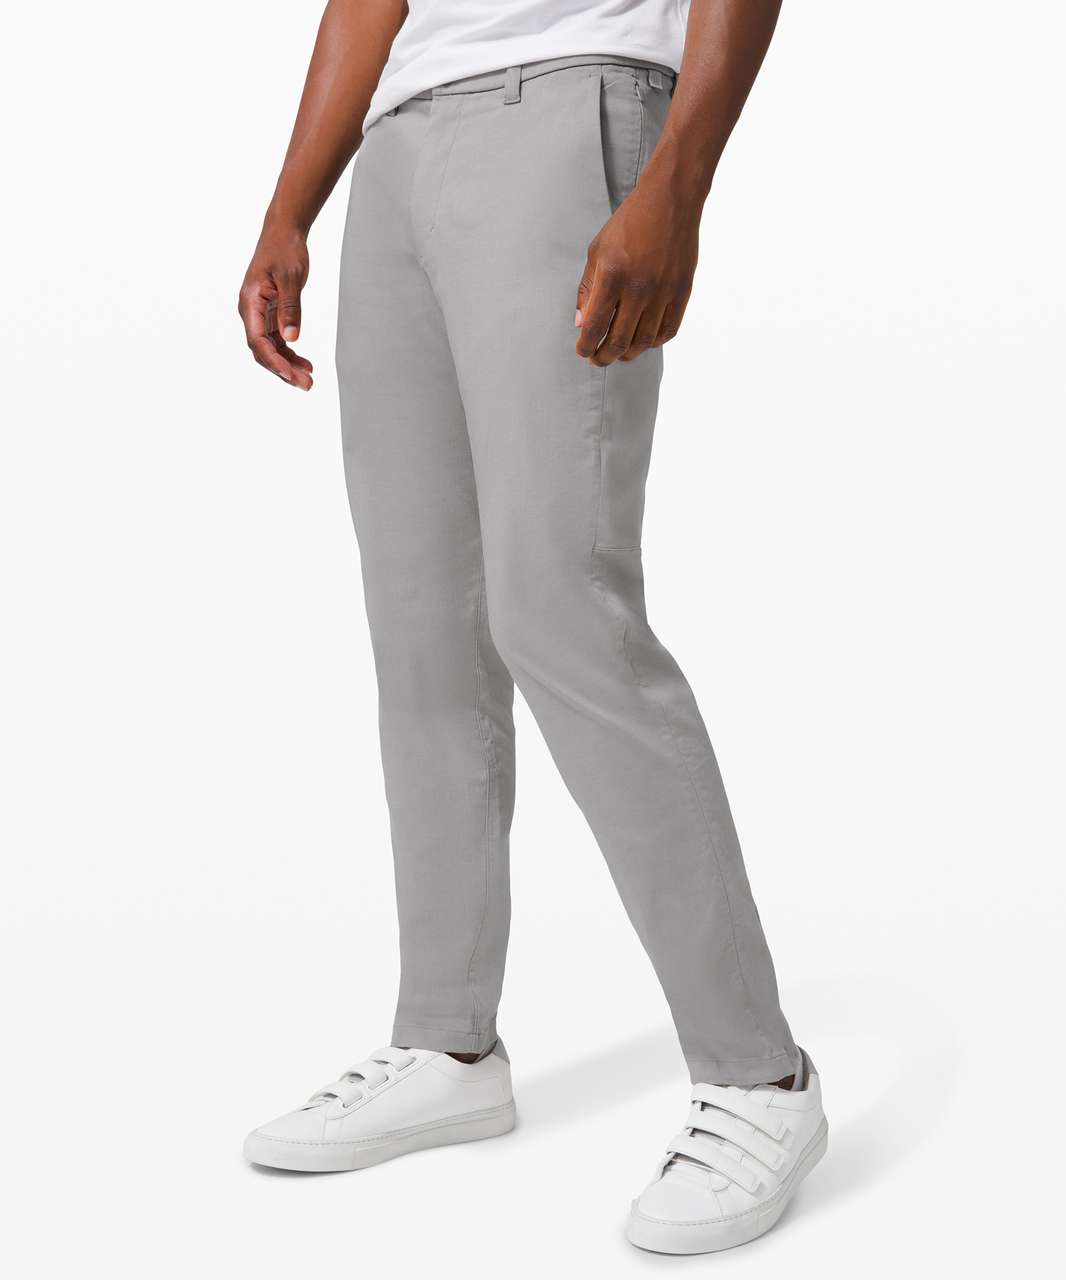 Lululemon Commission Pant Relaxed Reviews 2019